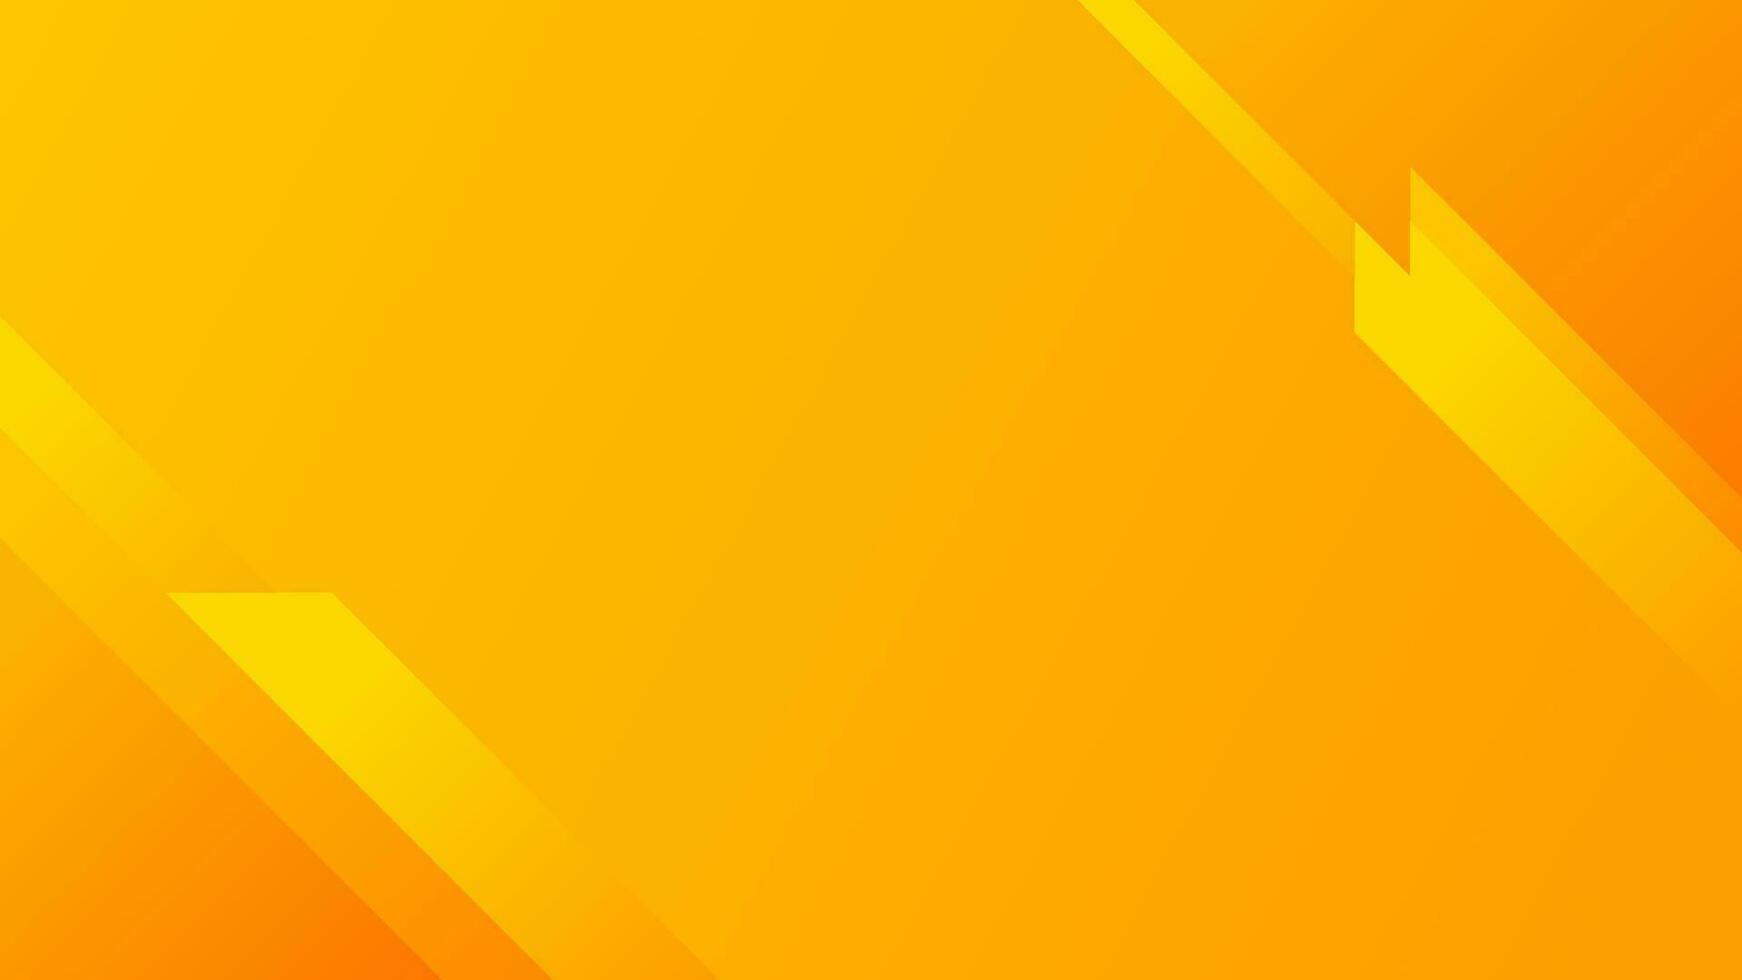 Abstract background vector illustration. Orange background vector illustration. Abstract yellow background for wallpaper, display, landing page, banner, or layout. Simple design graphic for display